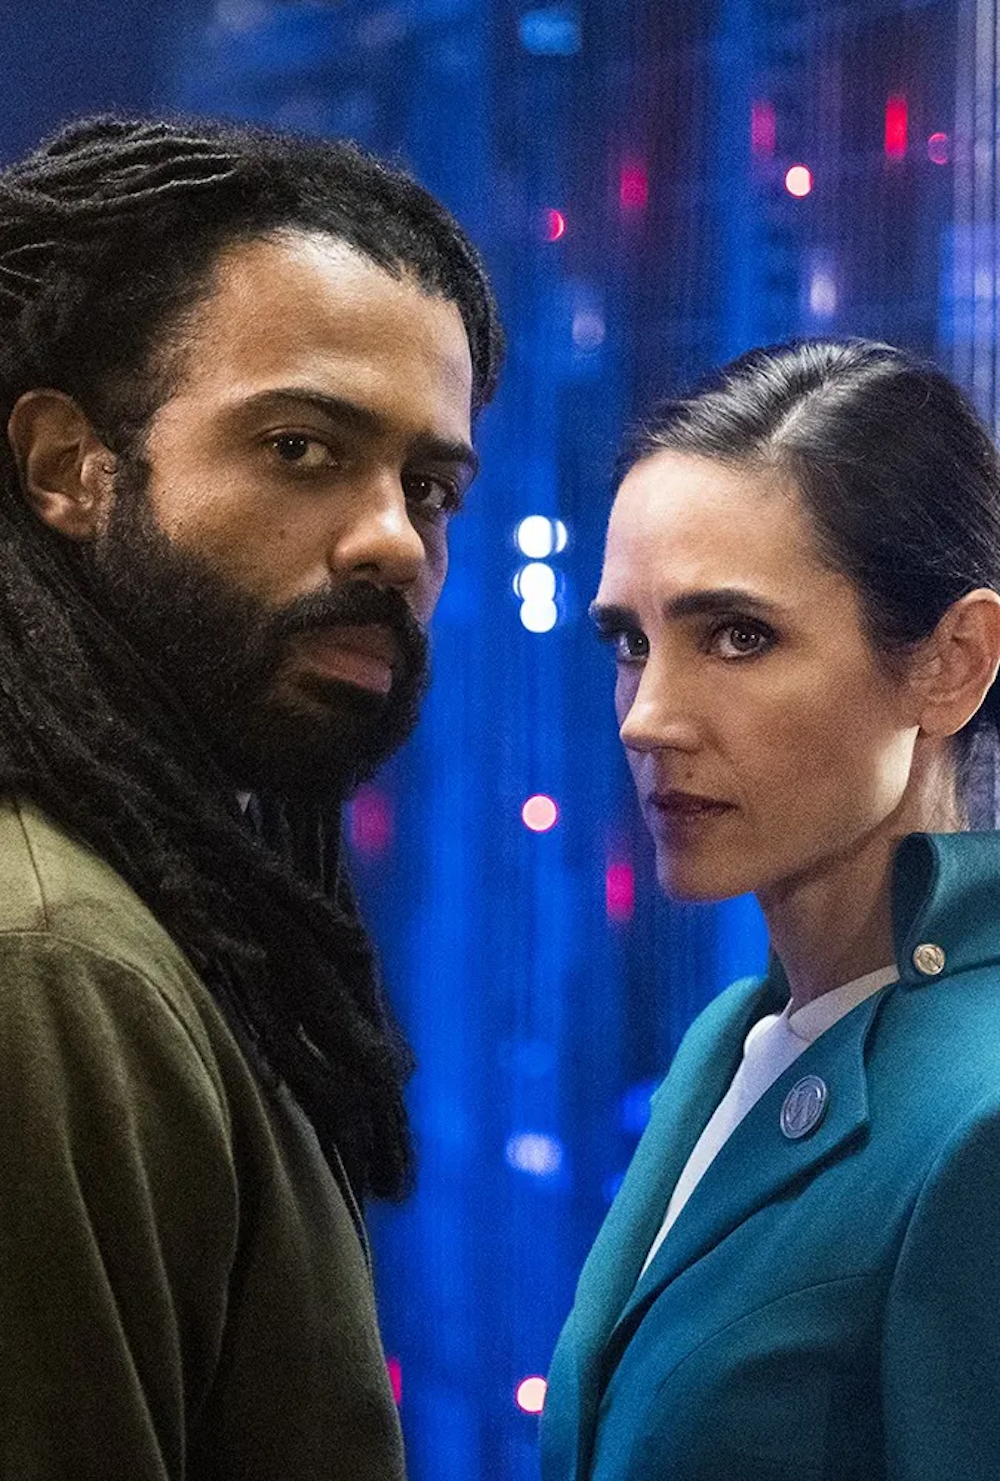 Daveed Diggs and Jennifer Connelly in Snowpiercer season 4